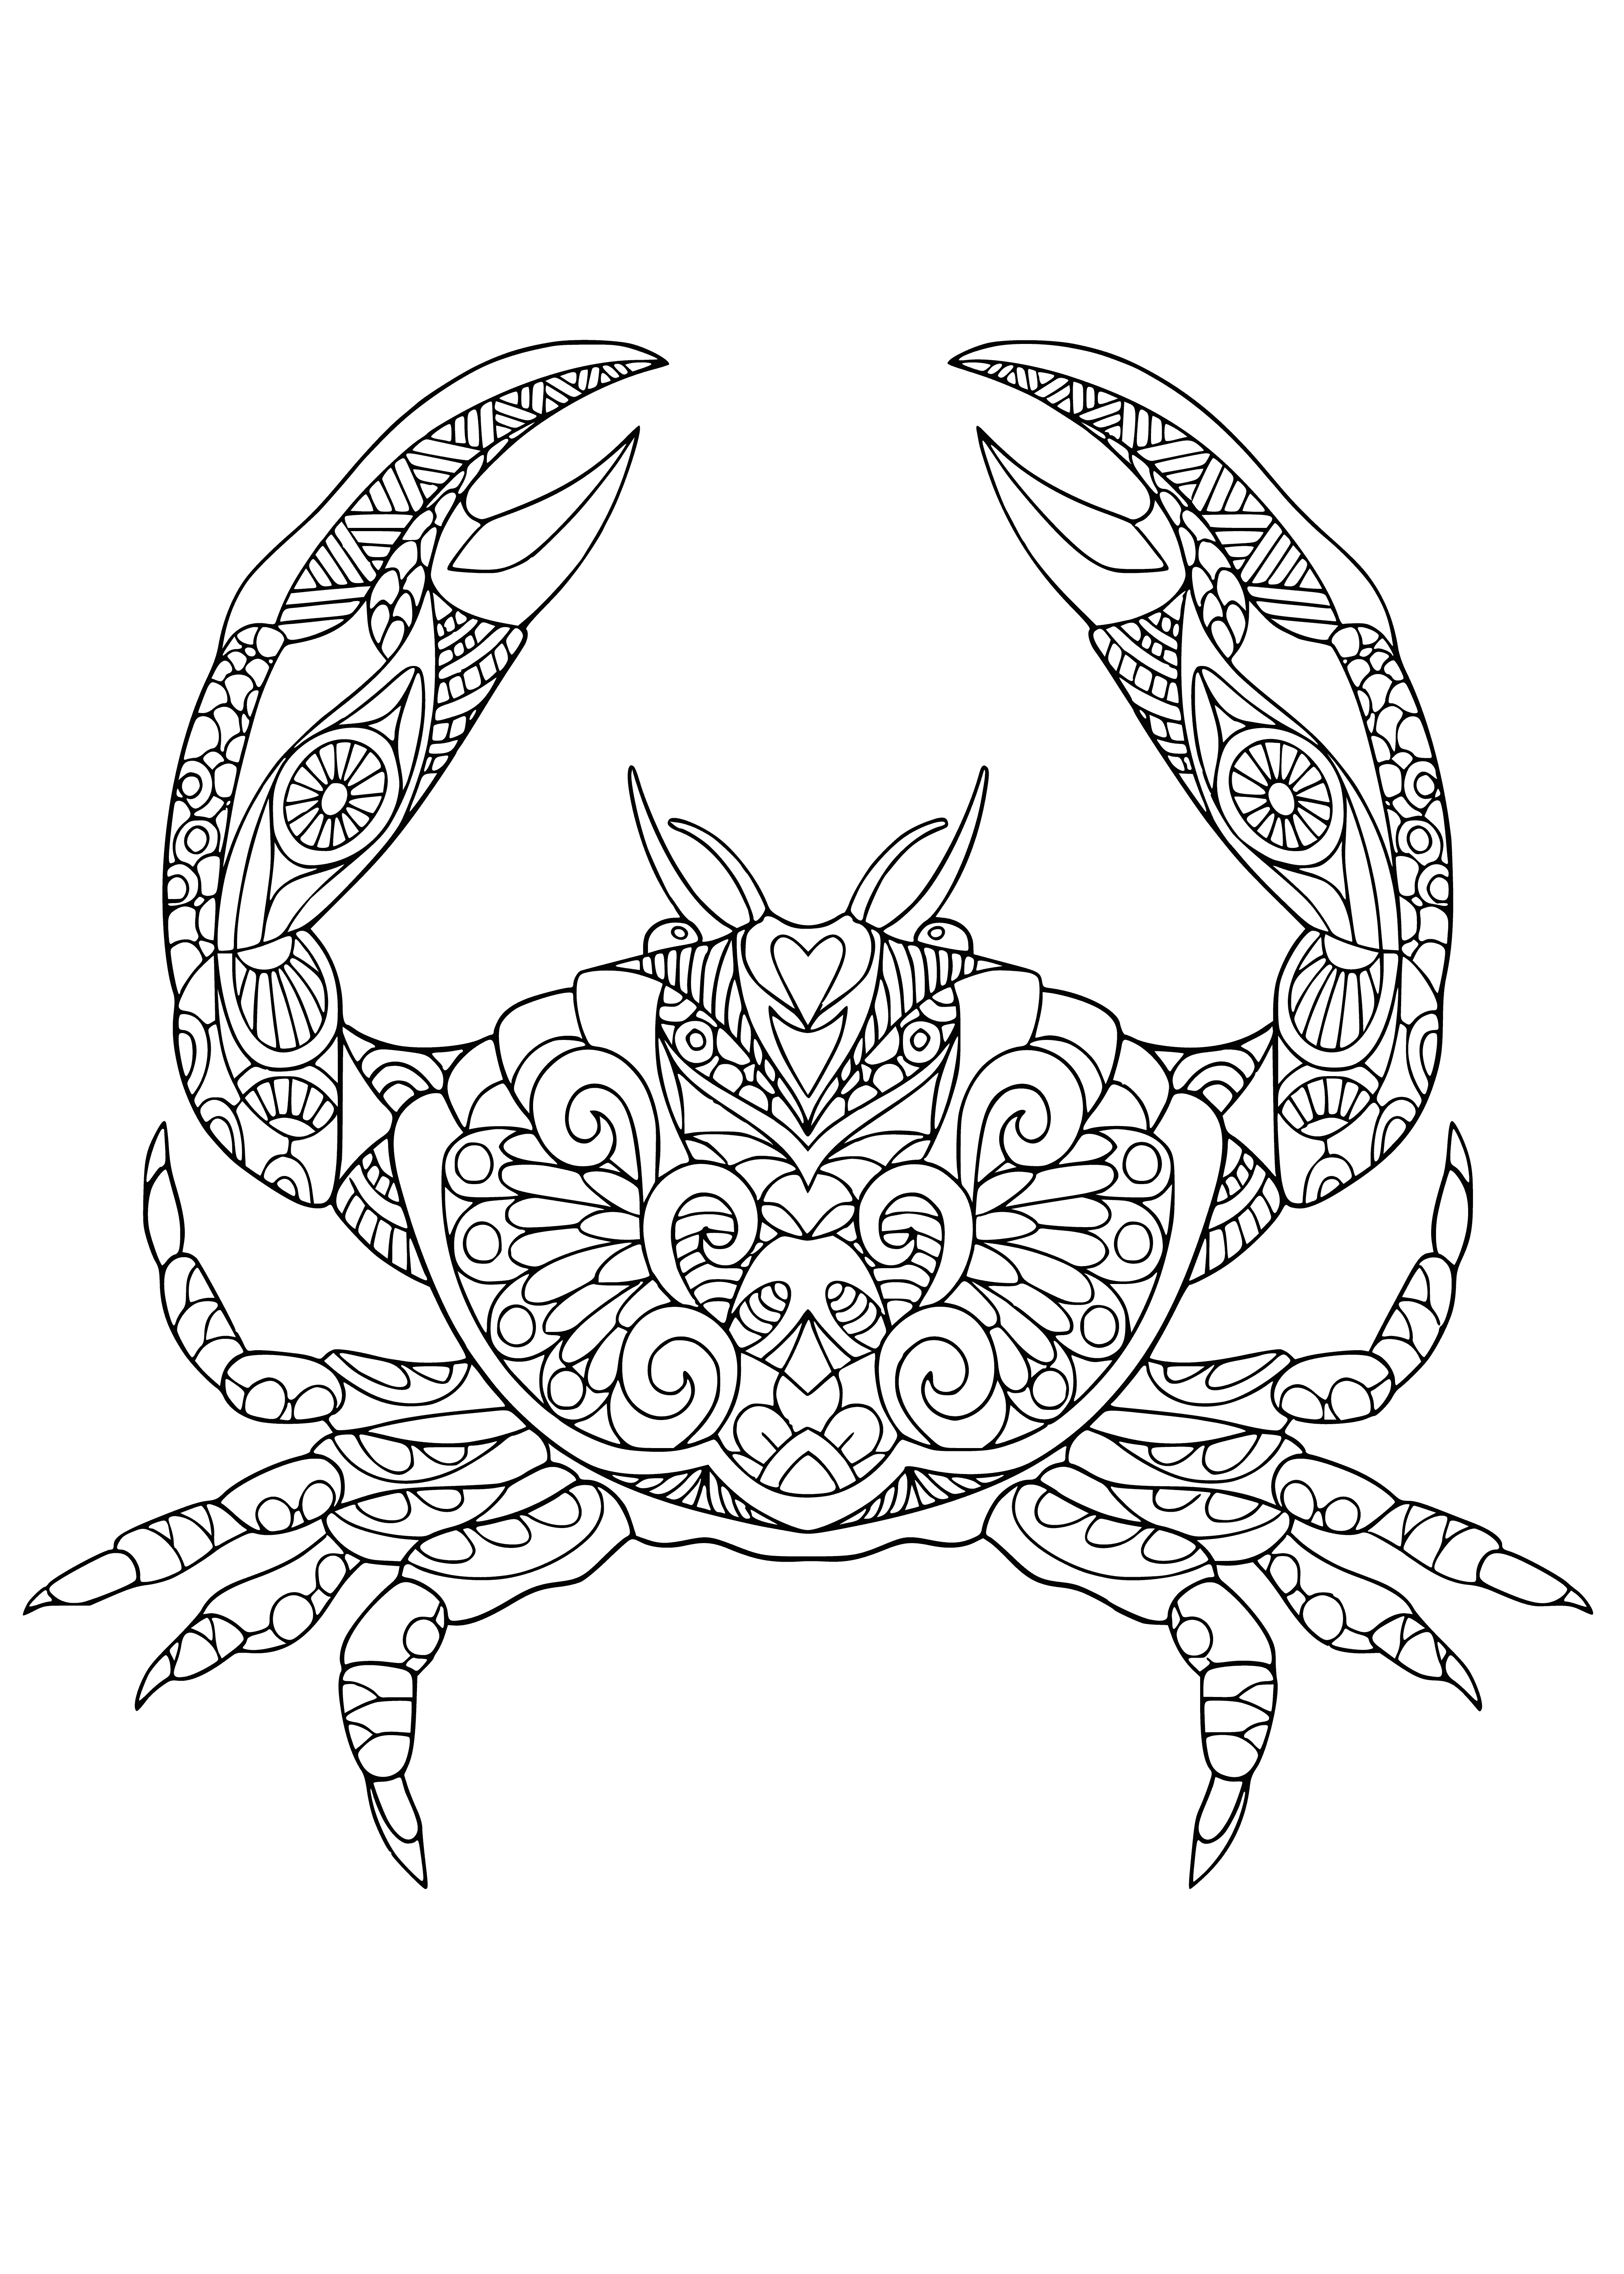 coloring page: A peaceful blue sea crab stands on a rock, surrounded by seaweed and other marine life. It looks content, seemingly enjoying the view.